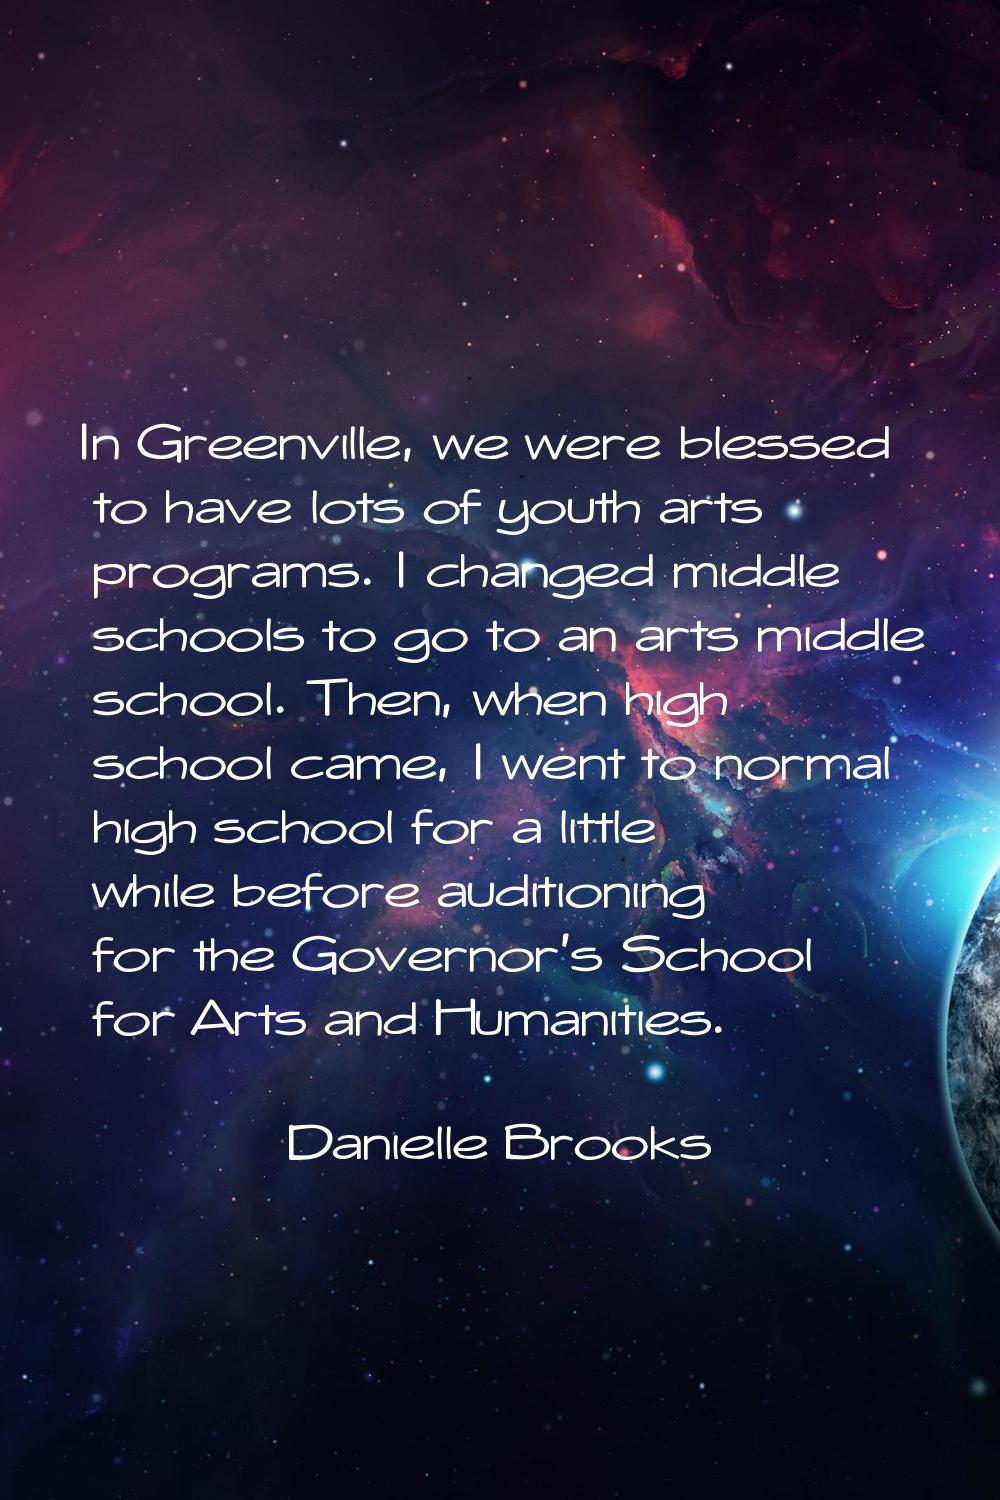 In Greenville, we were blessed to have lots of youth arts programs. I changed middle schools to go 